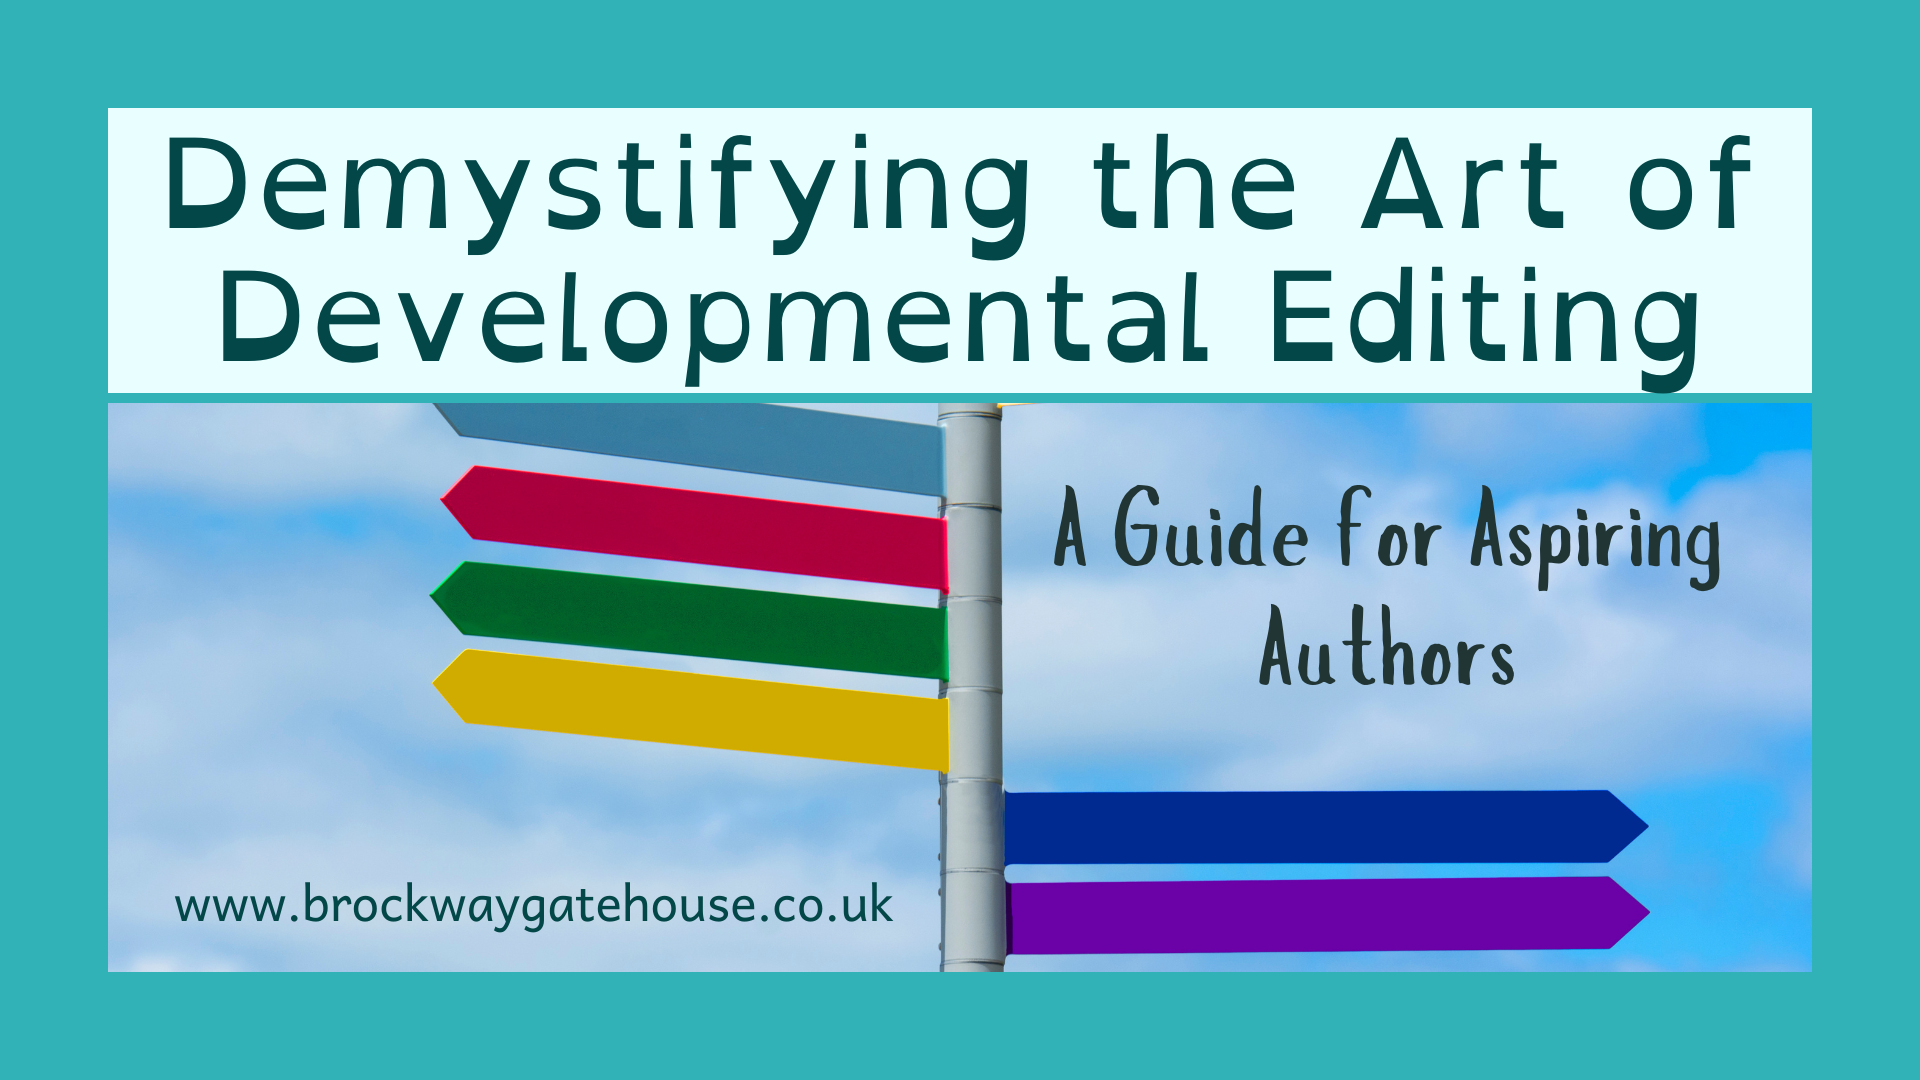 Text reads: Demystifying the Art of Developmental Editing. A Guide for Aspiring Authors Image shows signpost with 6 multicoloured directional signs